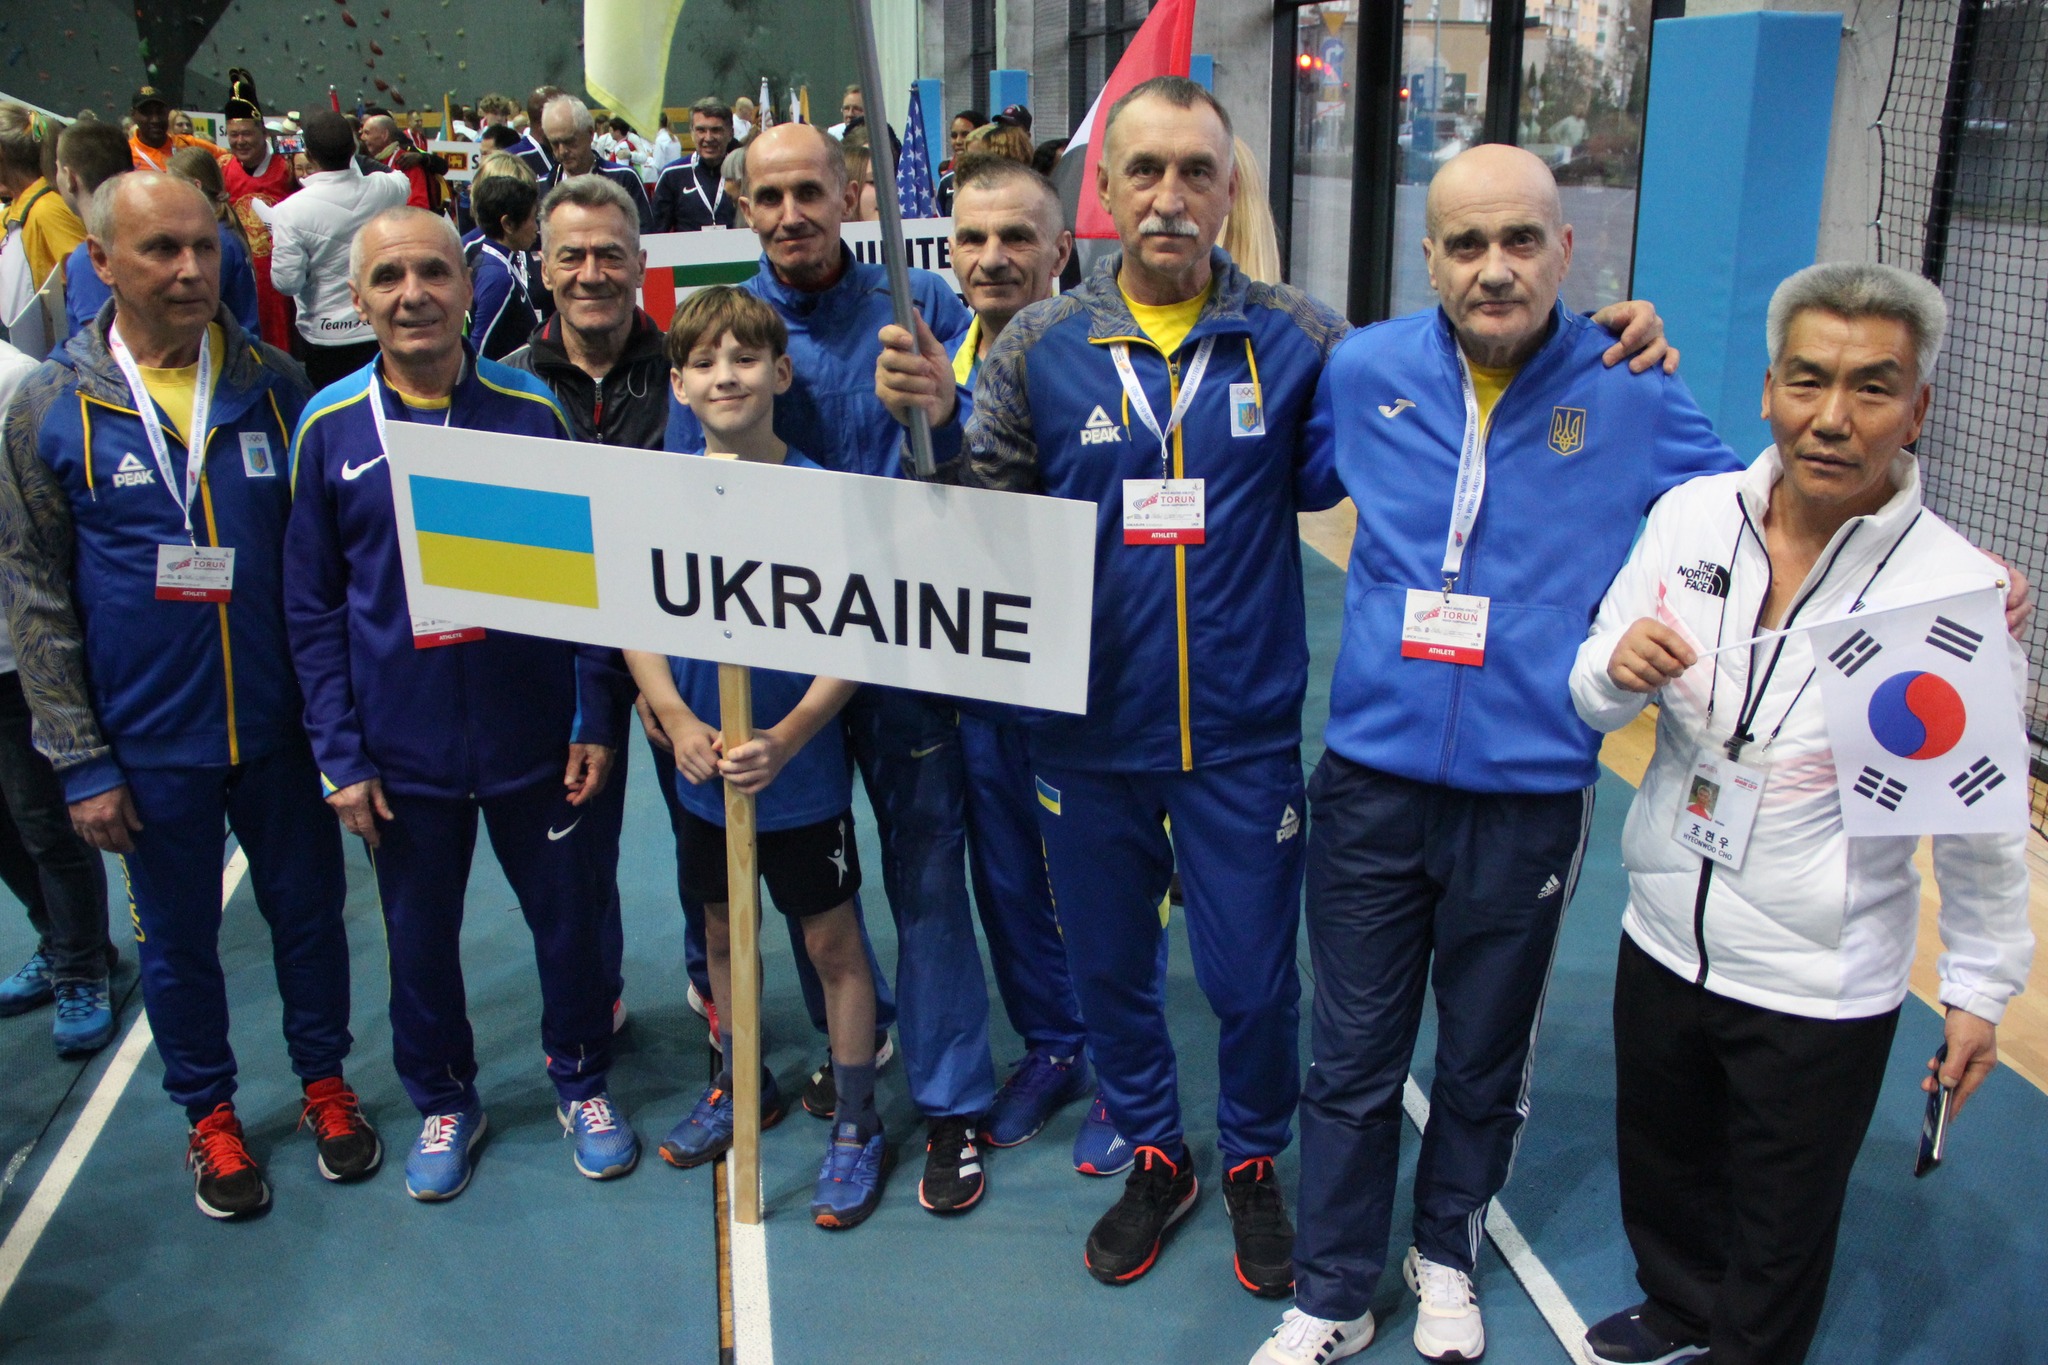 Team Ukraine ready for Opening Ceremony. Photo by Sandy Triolo.